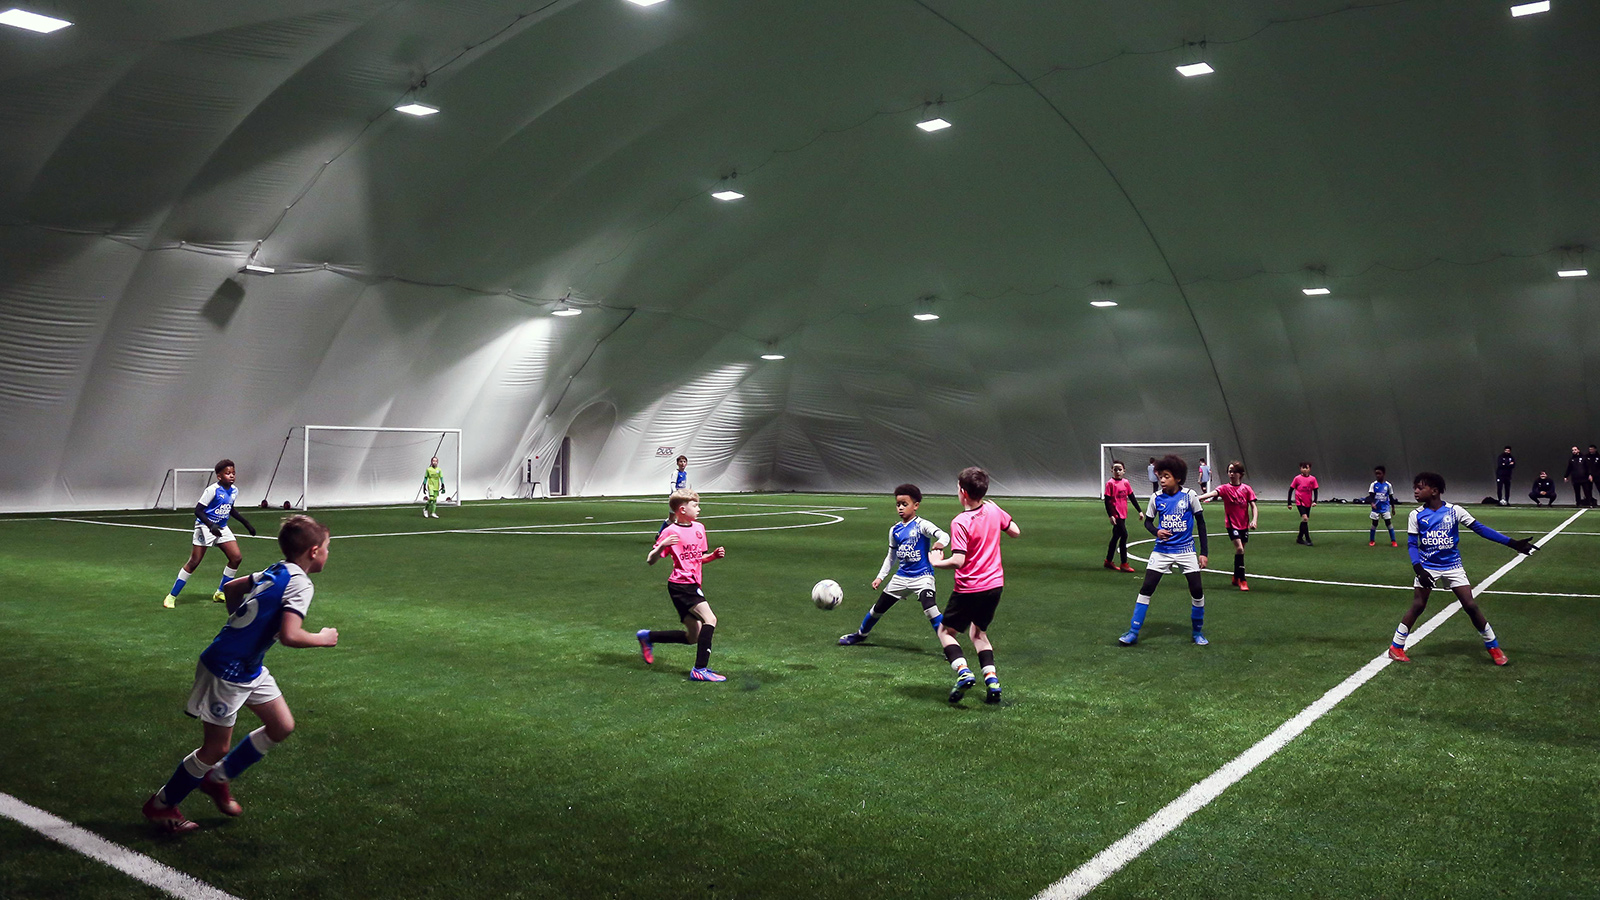 Training in the dome